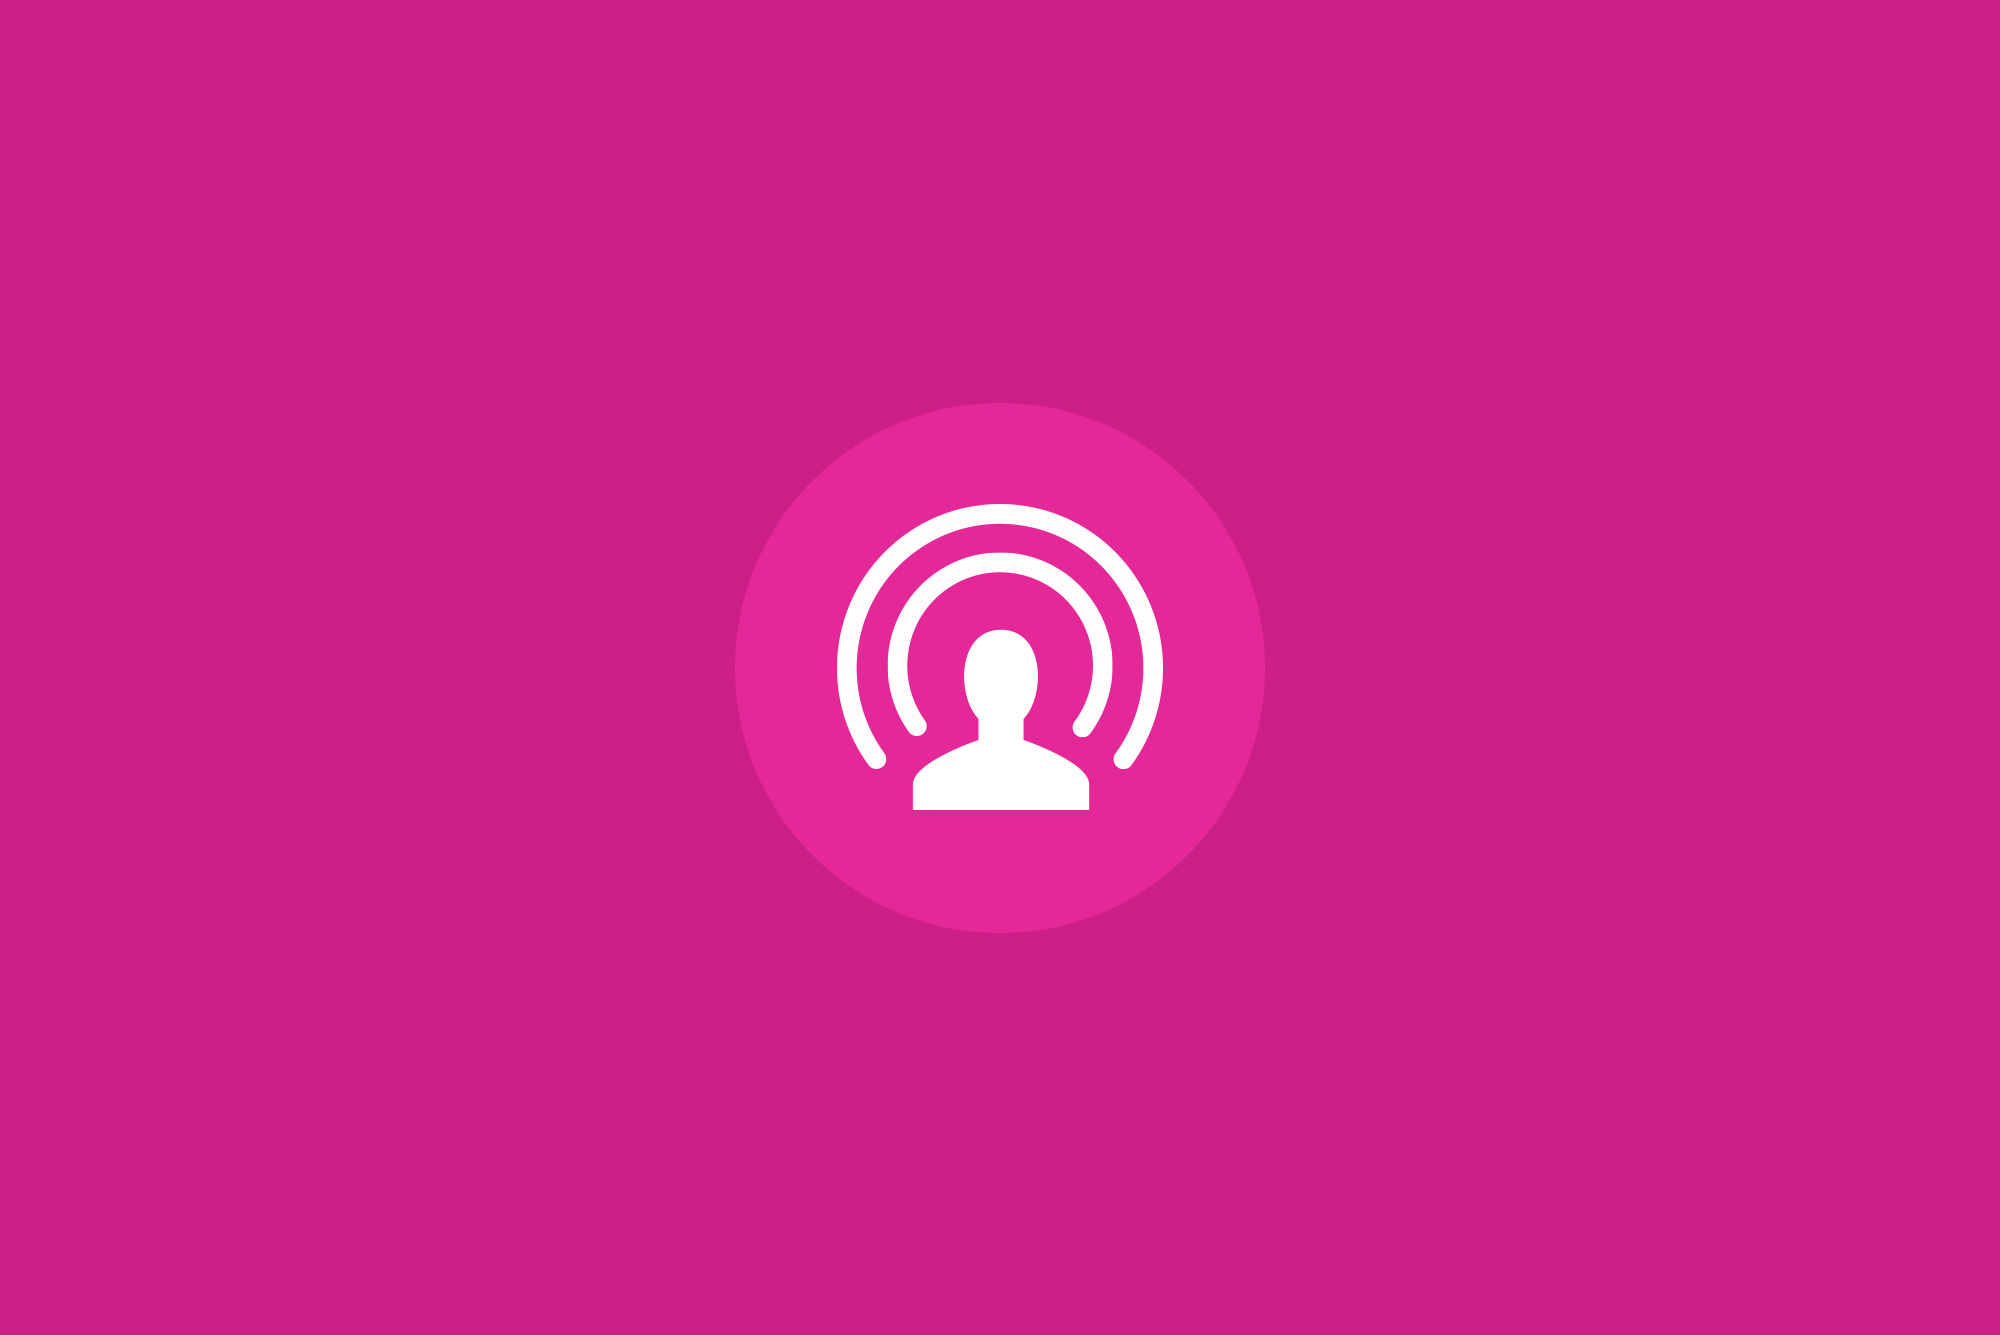 Live video icon in white with a pink background